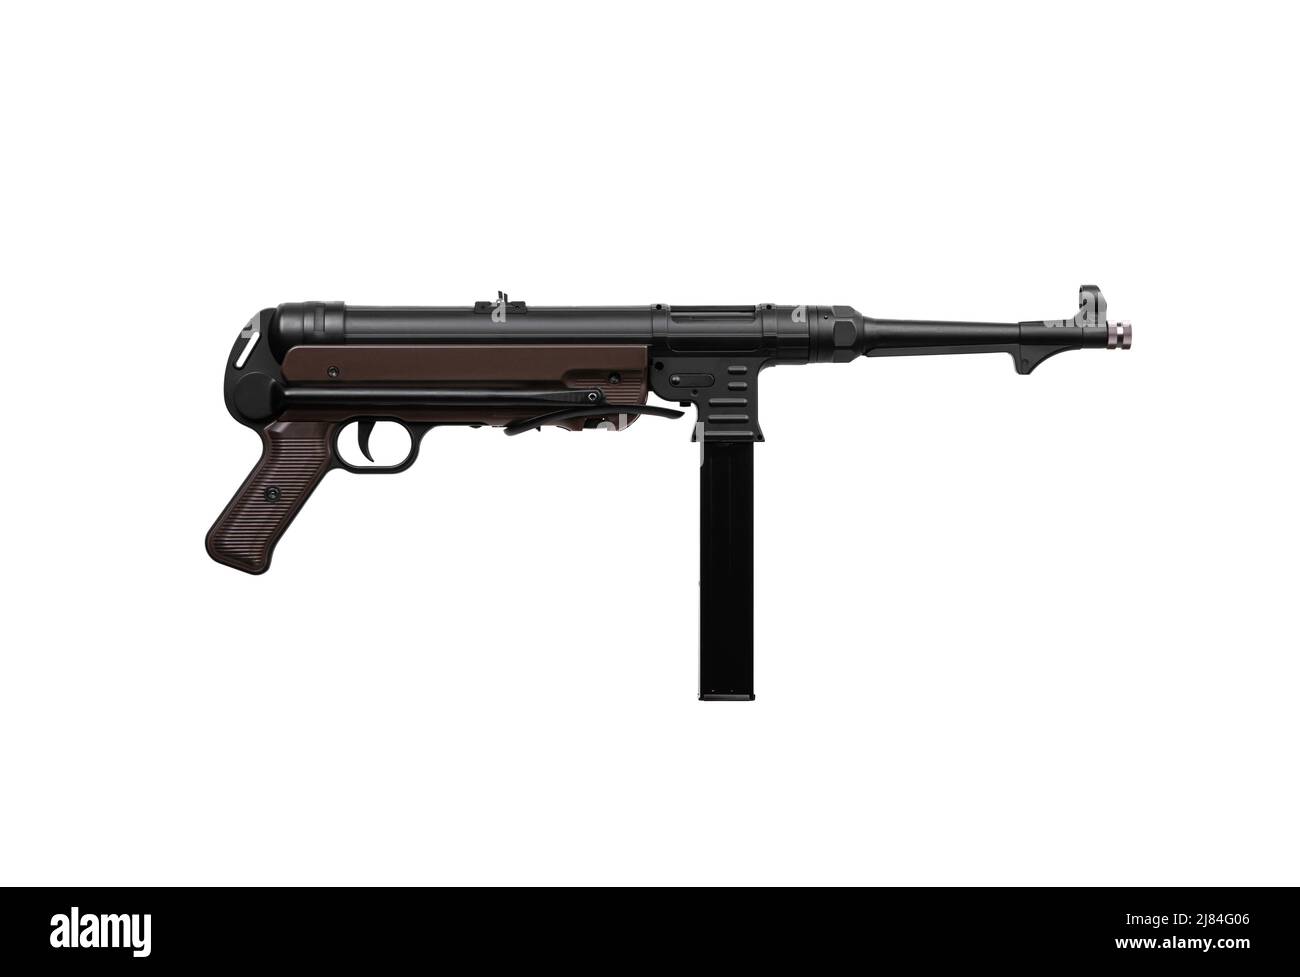 Vintage German submachine gun MP 40. Weapons of the Second World War. Isolate on a white background. Stock Photo